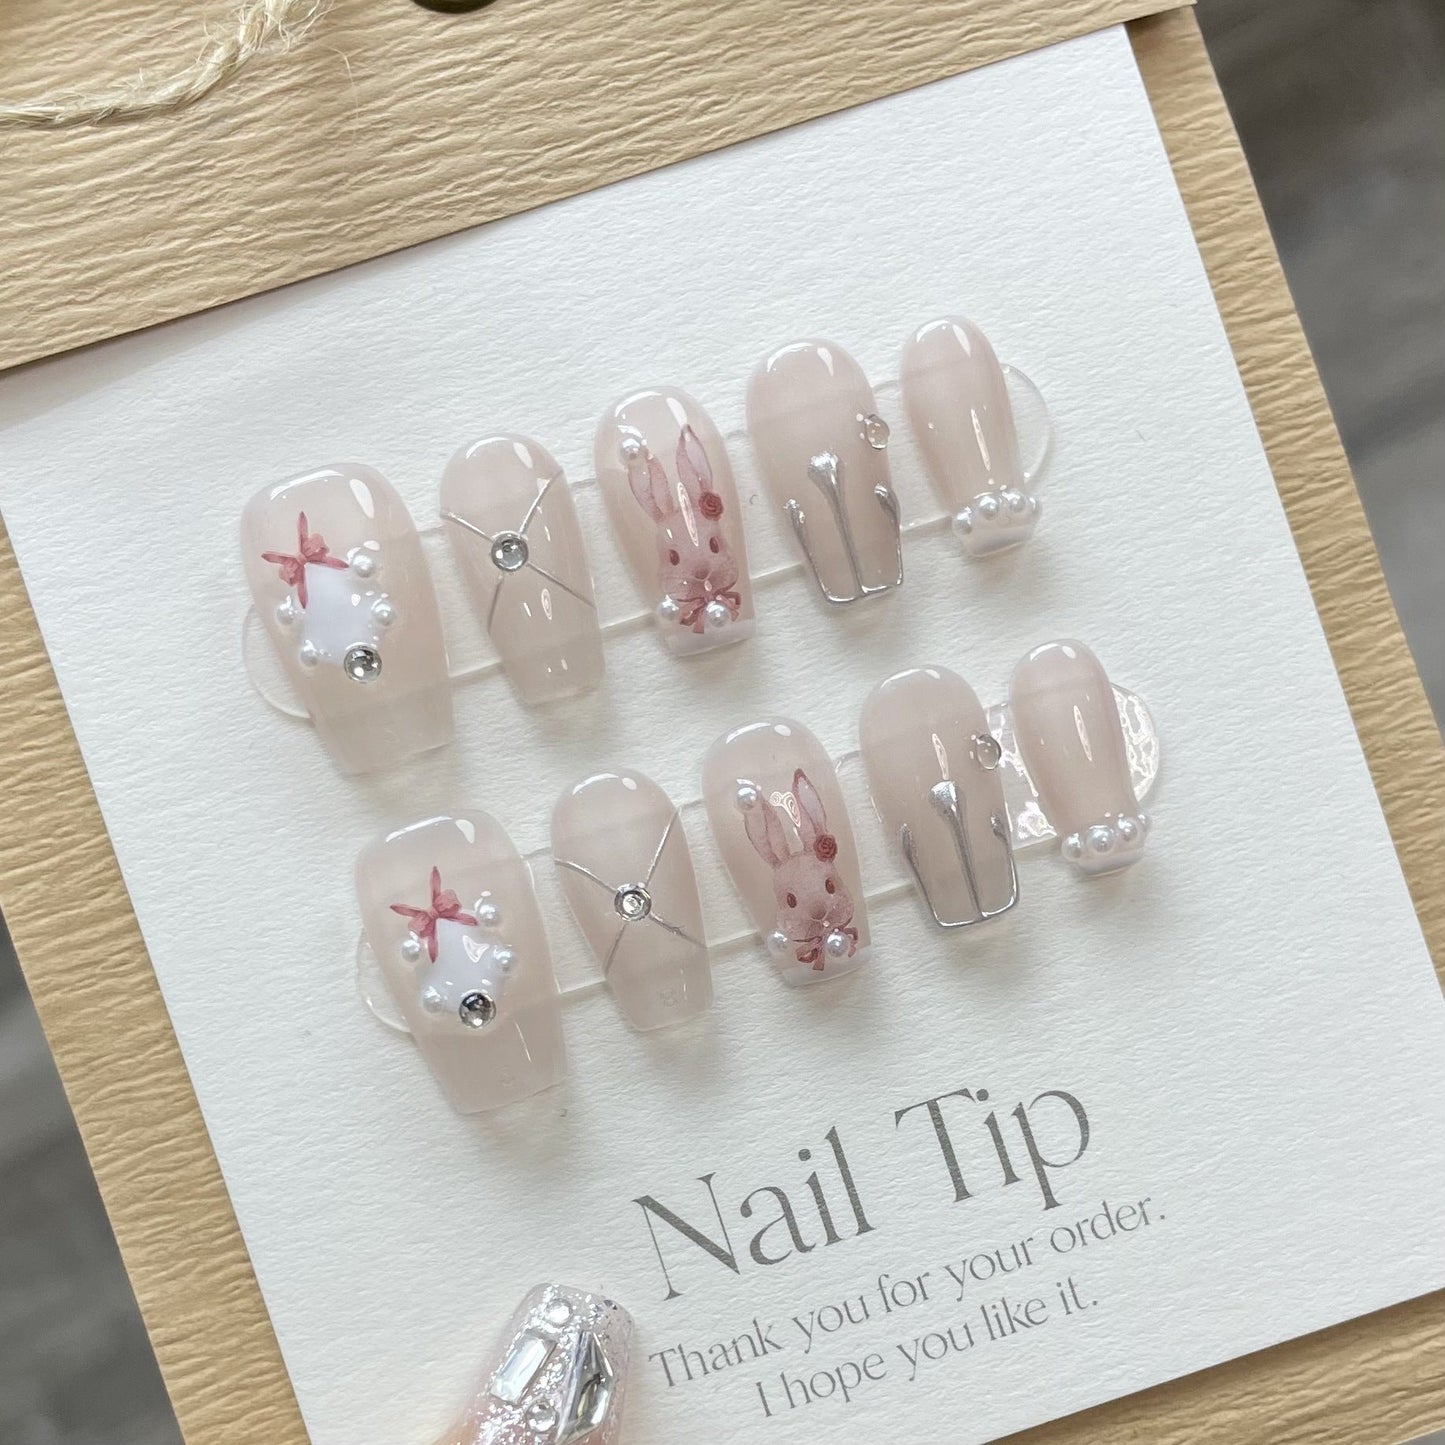 734 rabbit style press on nails 100% handmade false nails nude color pink